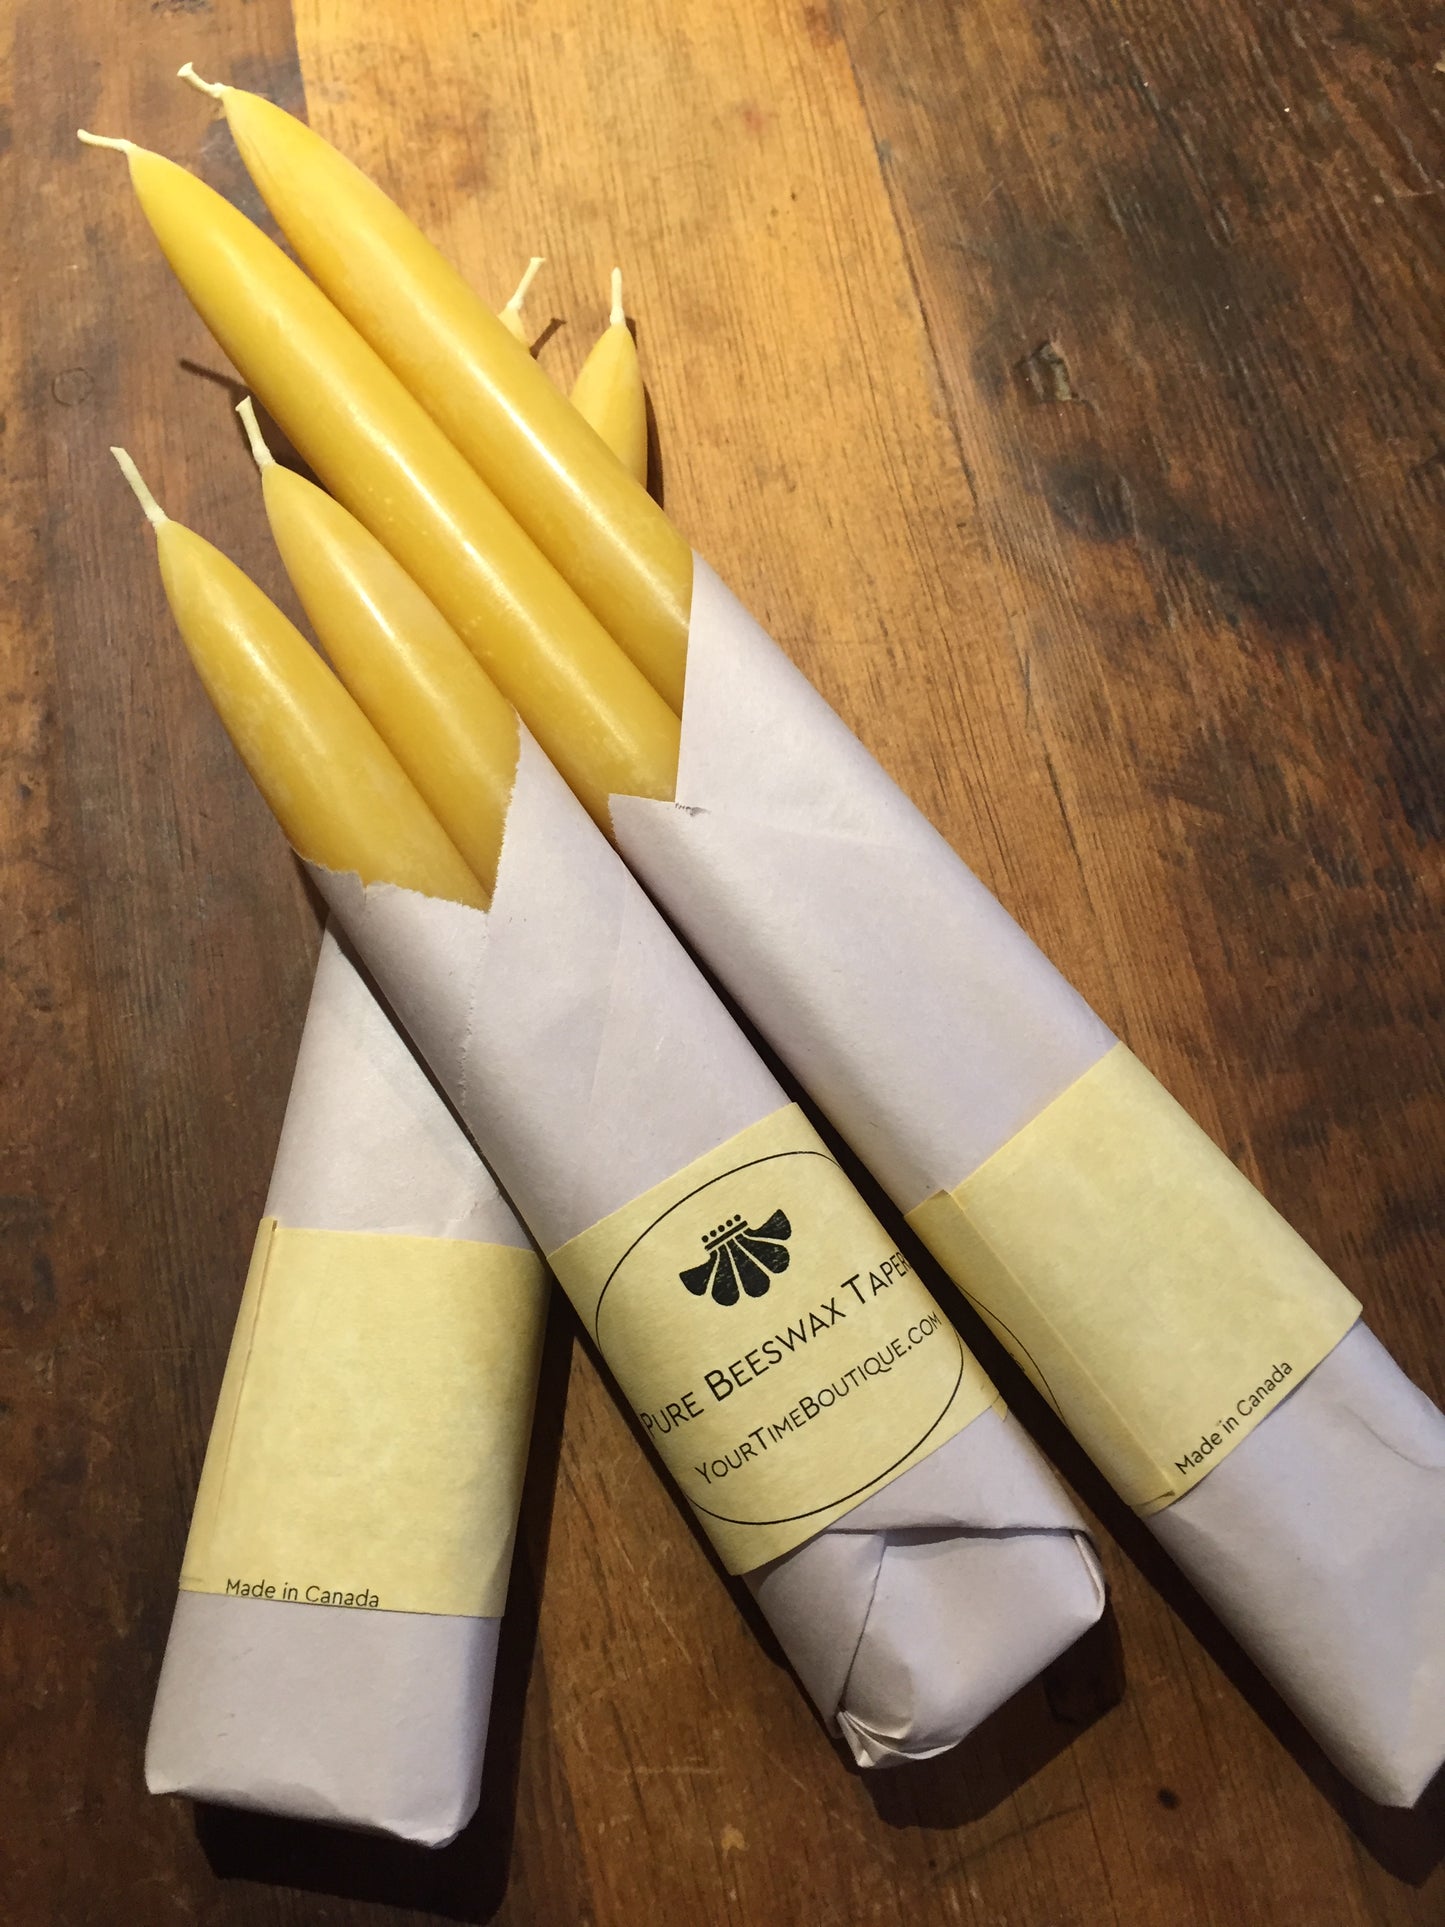 Beeswax Candles - 8 INCH TAPER PAIR